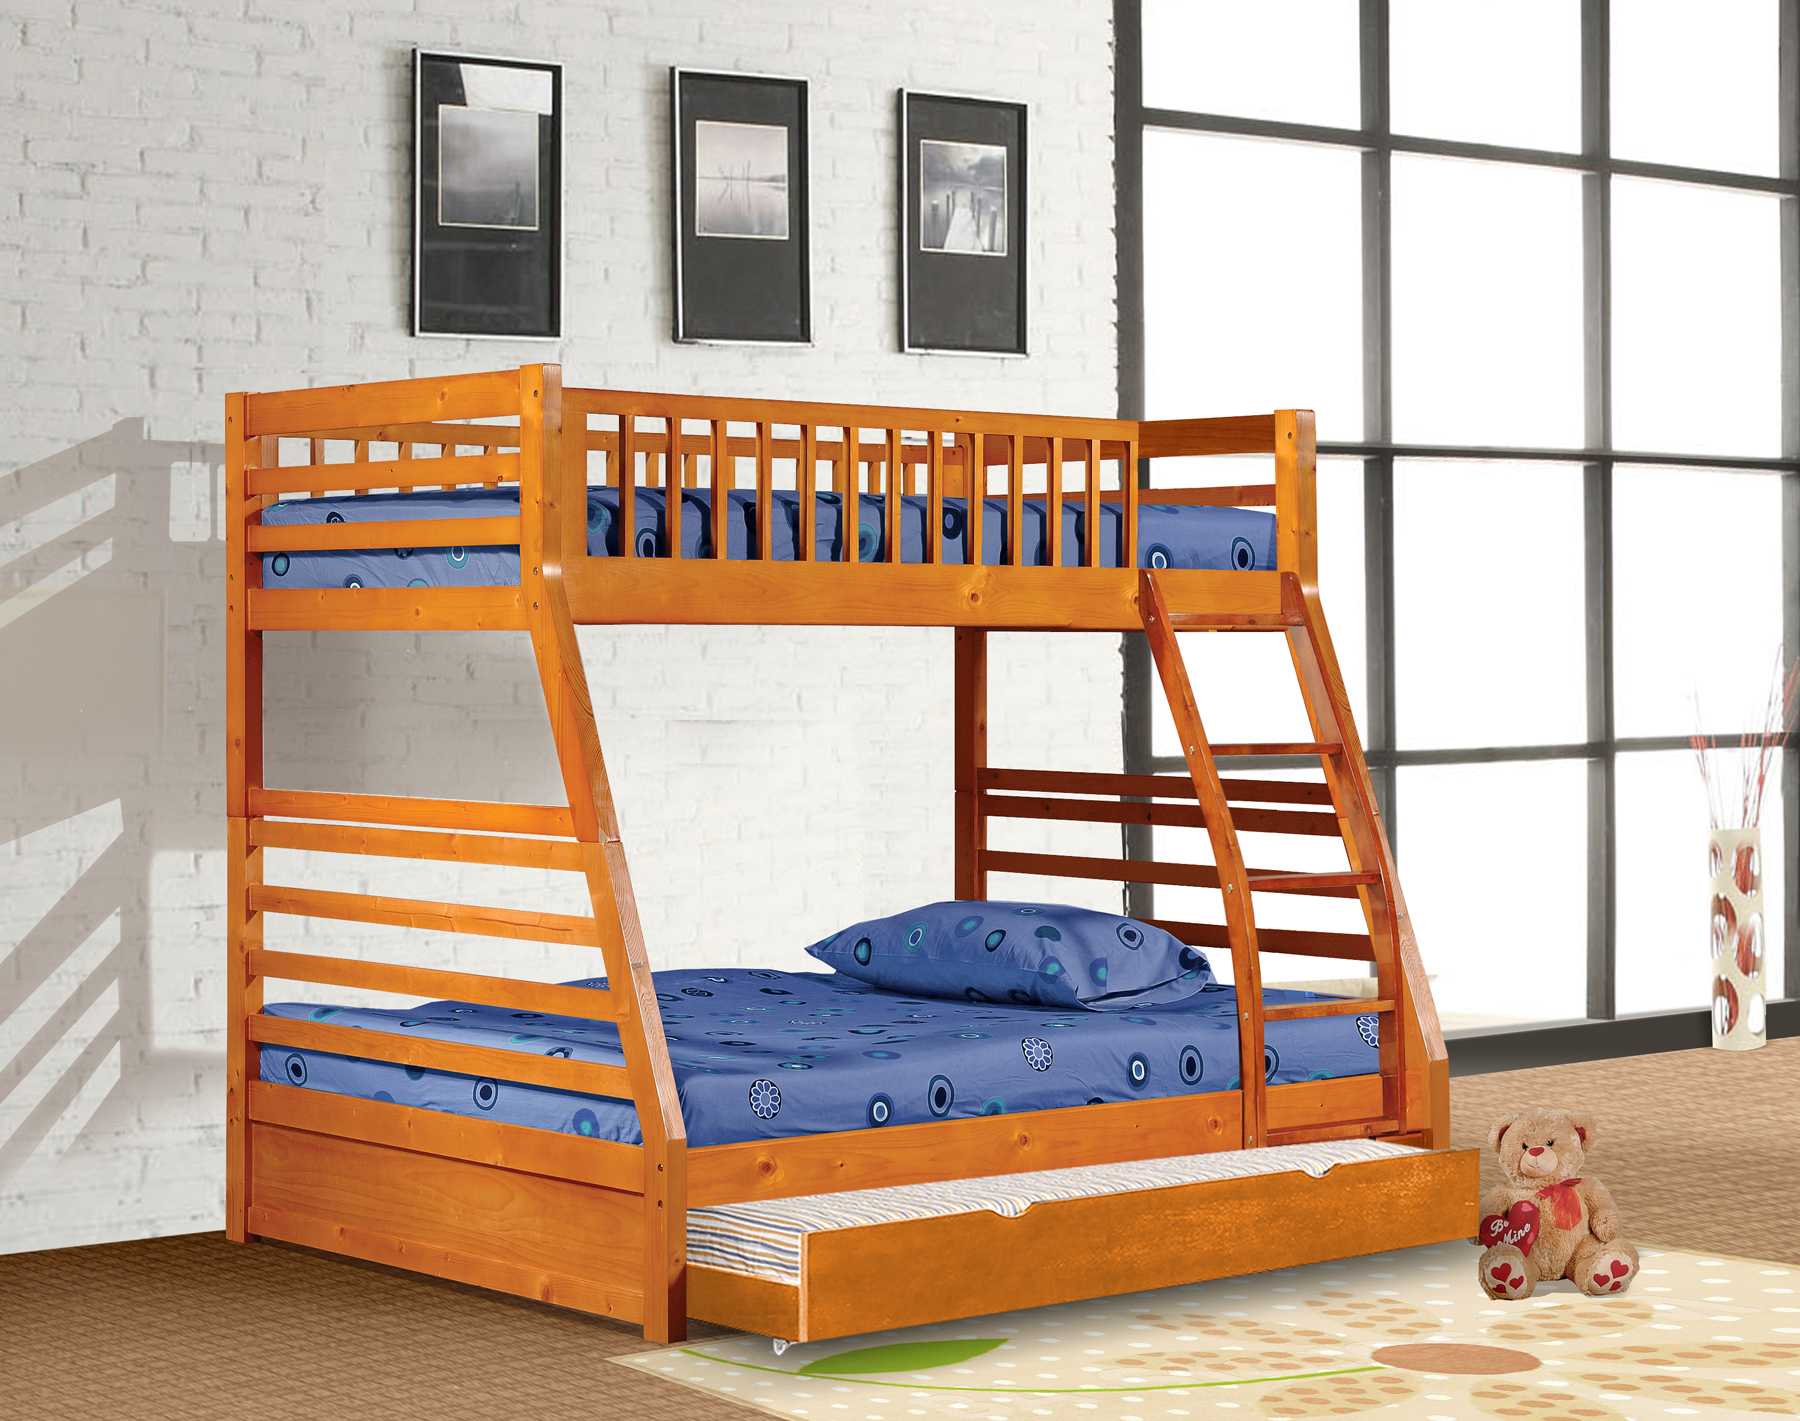 78.75" X 42.5-57.25" X 65" Oak Manufactured Wood and Solid Wood Twin or Full Bunk Bed with Matching Trundle